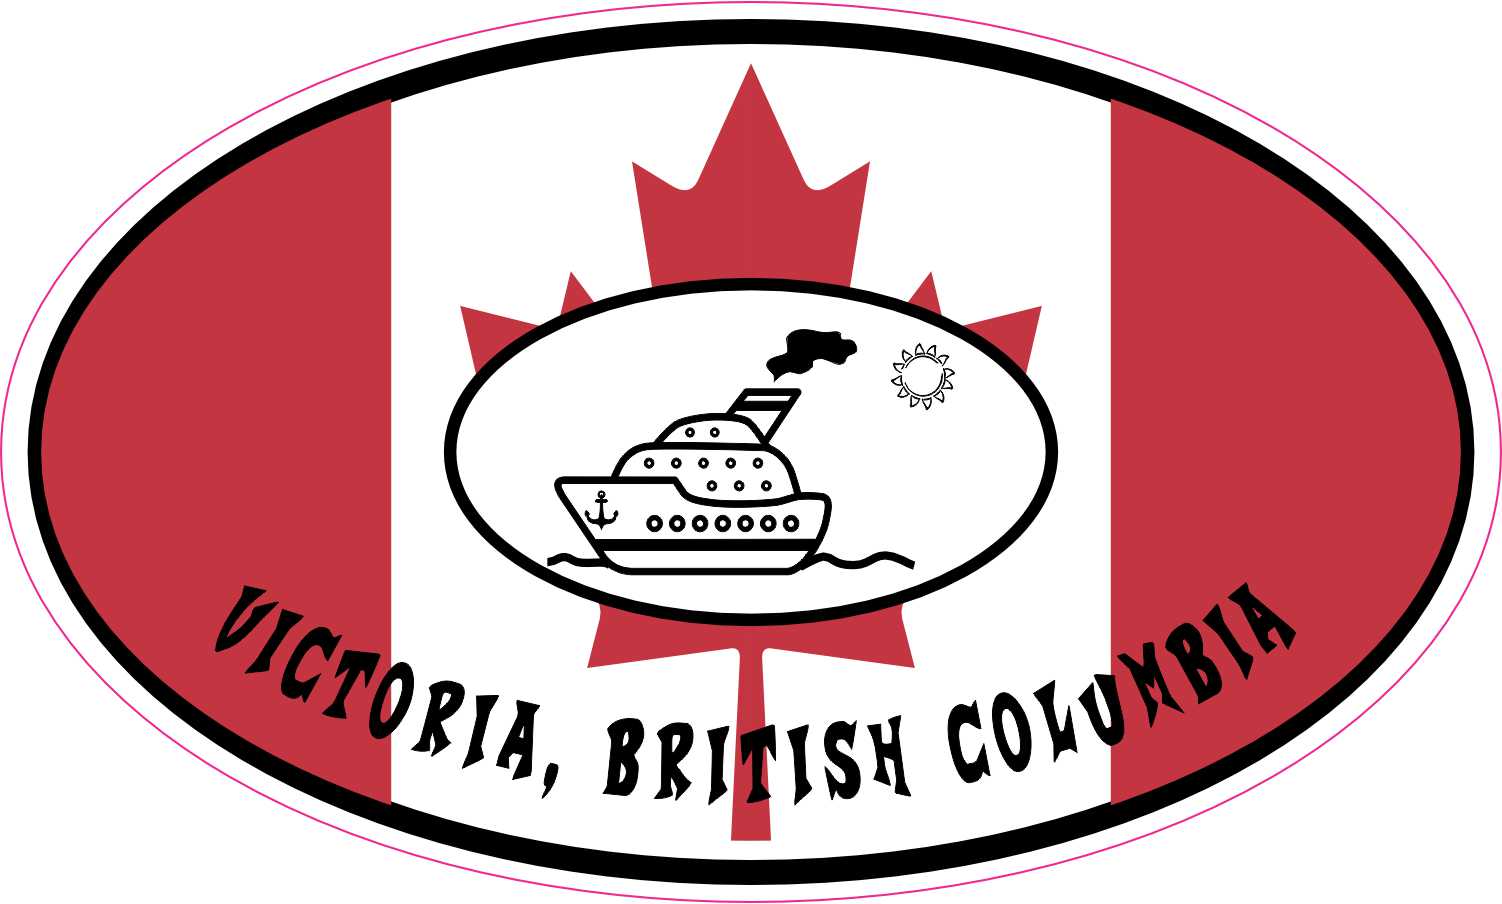 Sticker oval flag vinyl country code canada british columbia